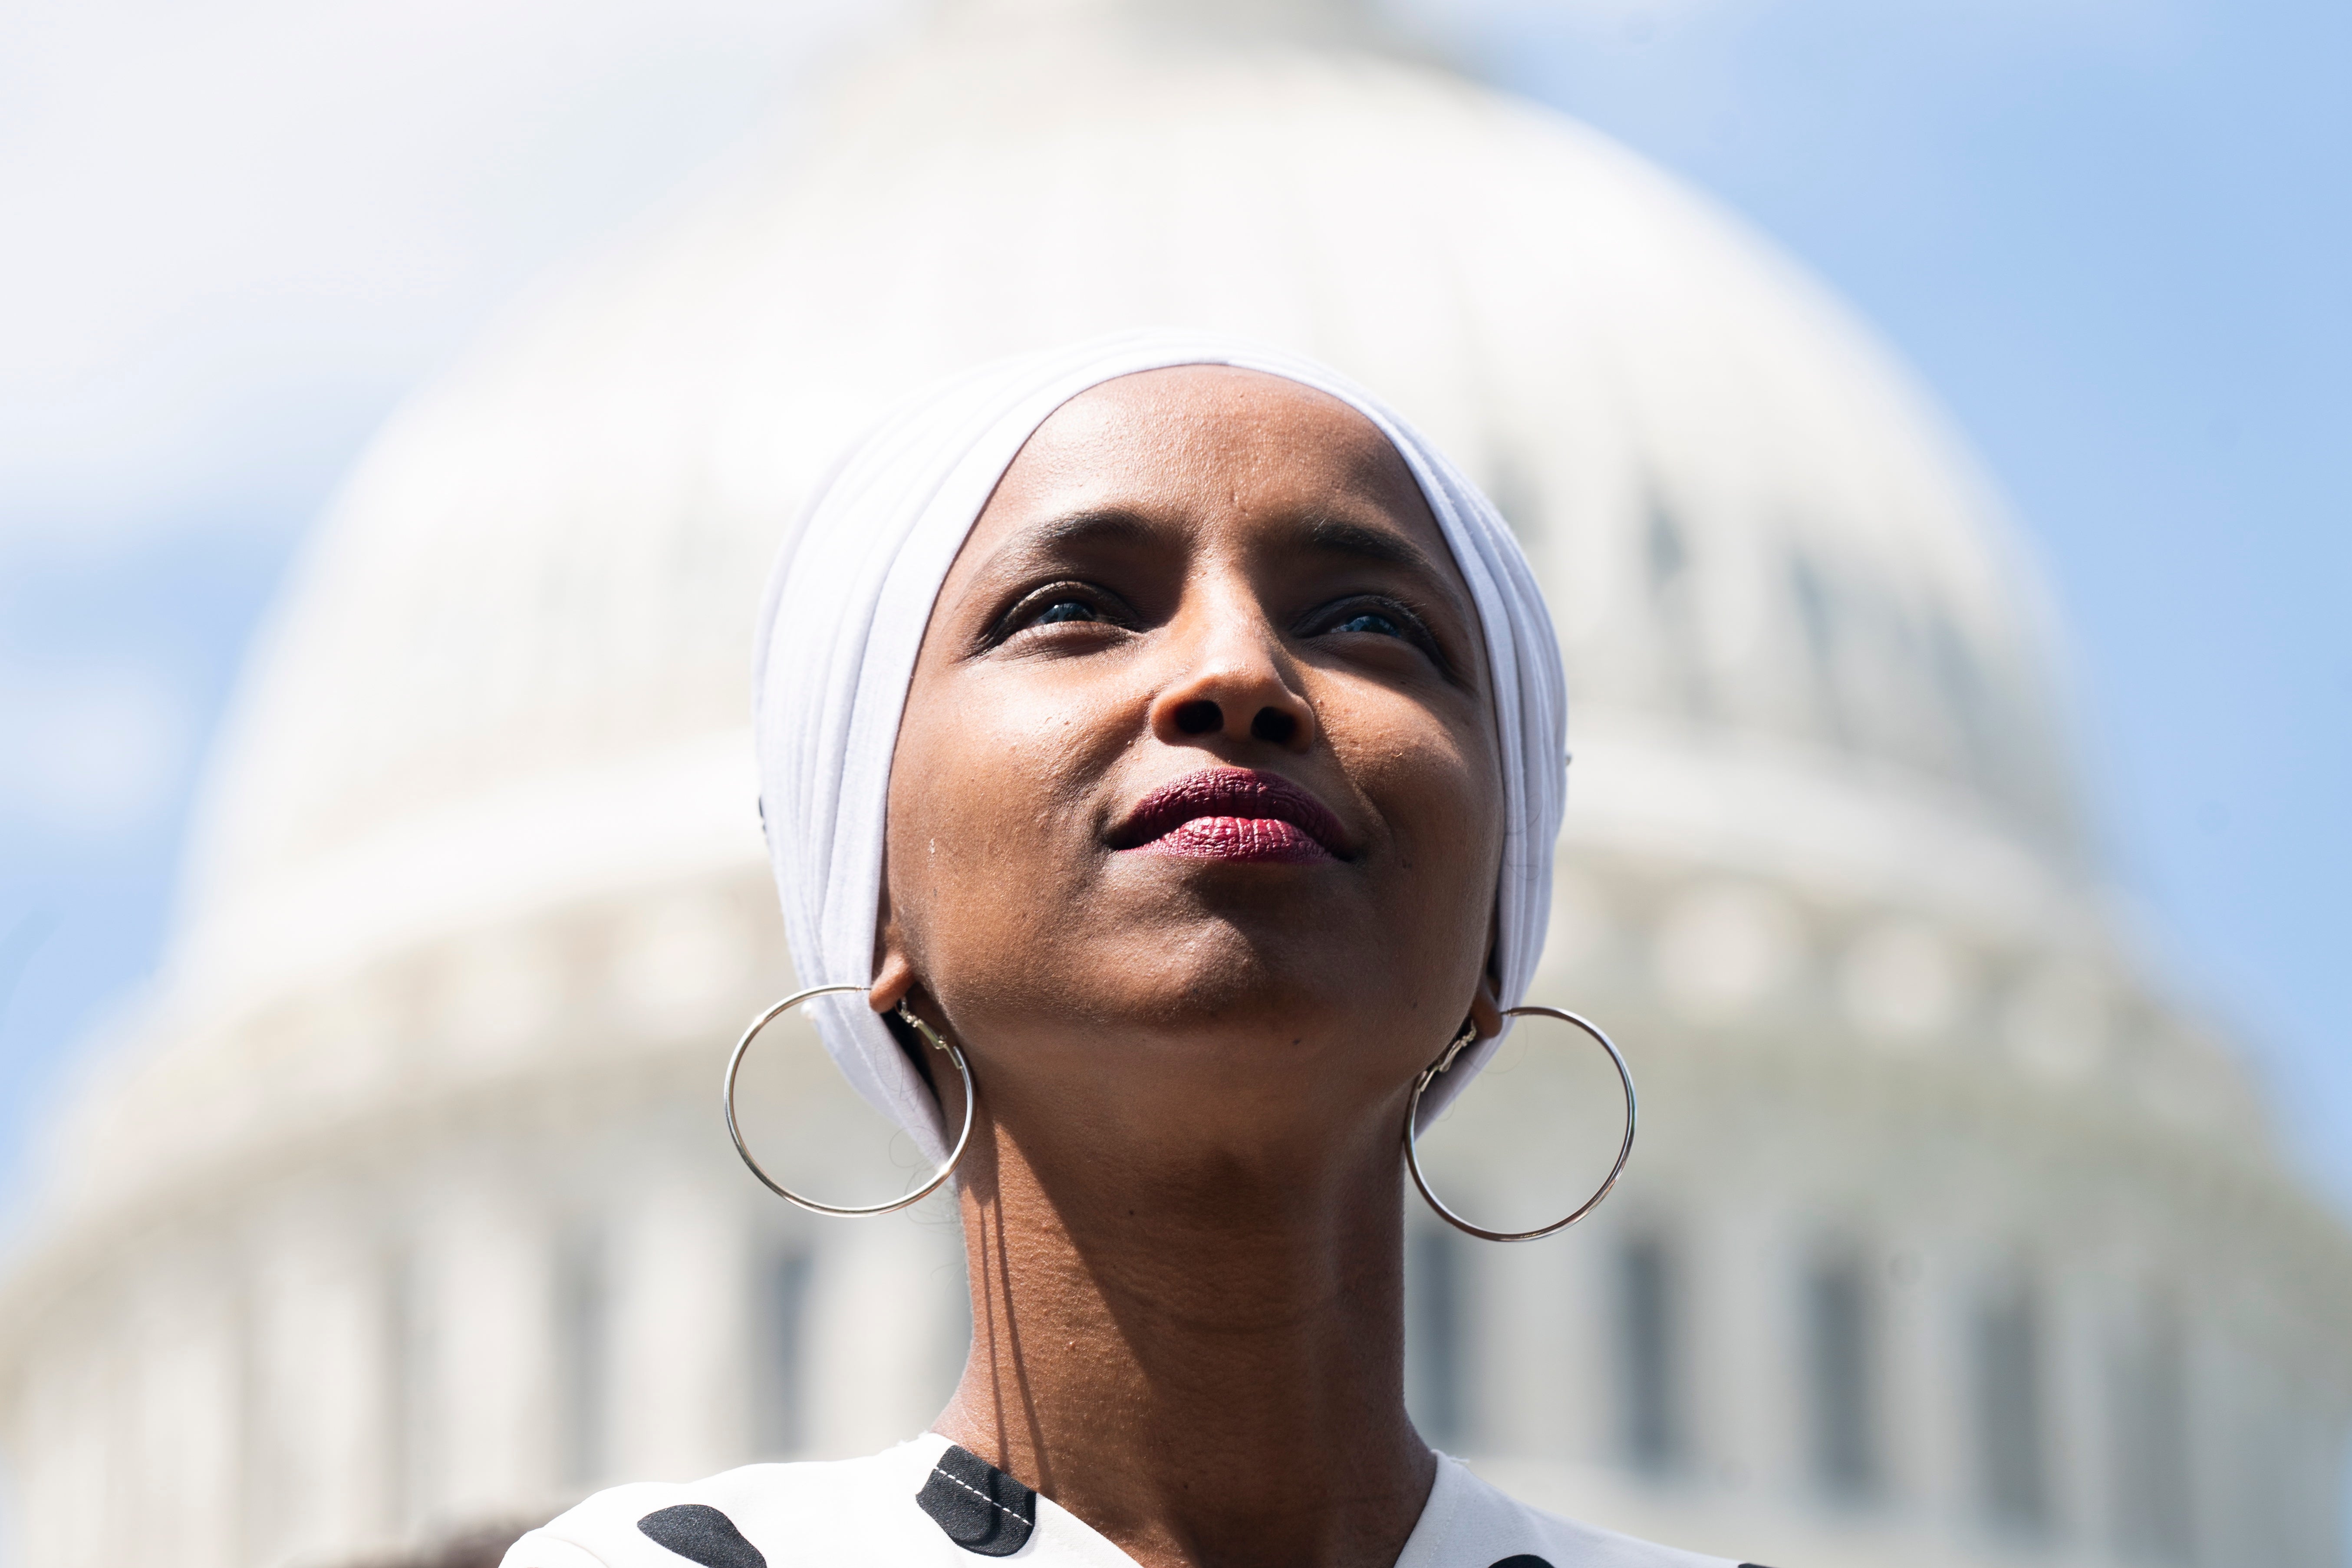 Minnesota congresswoman Ilhan Omar stands outside the US Capitol